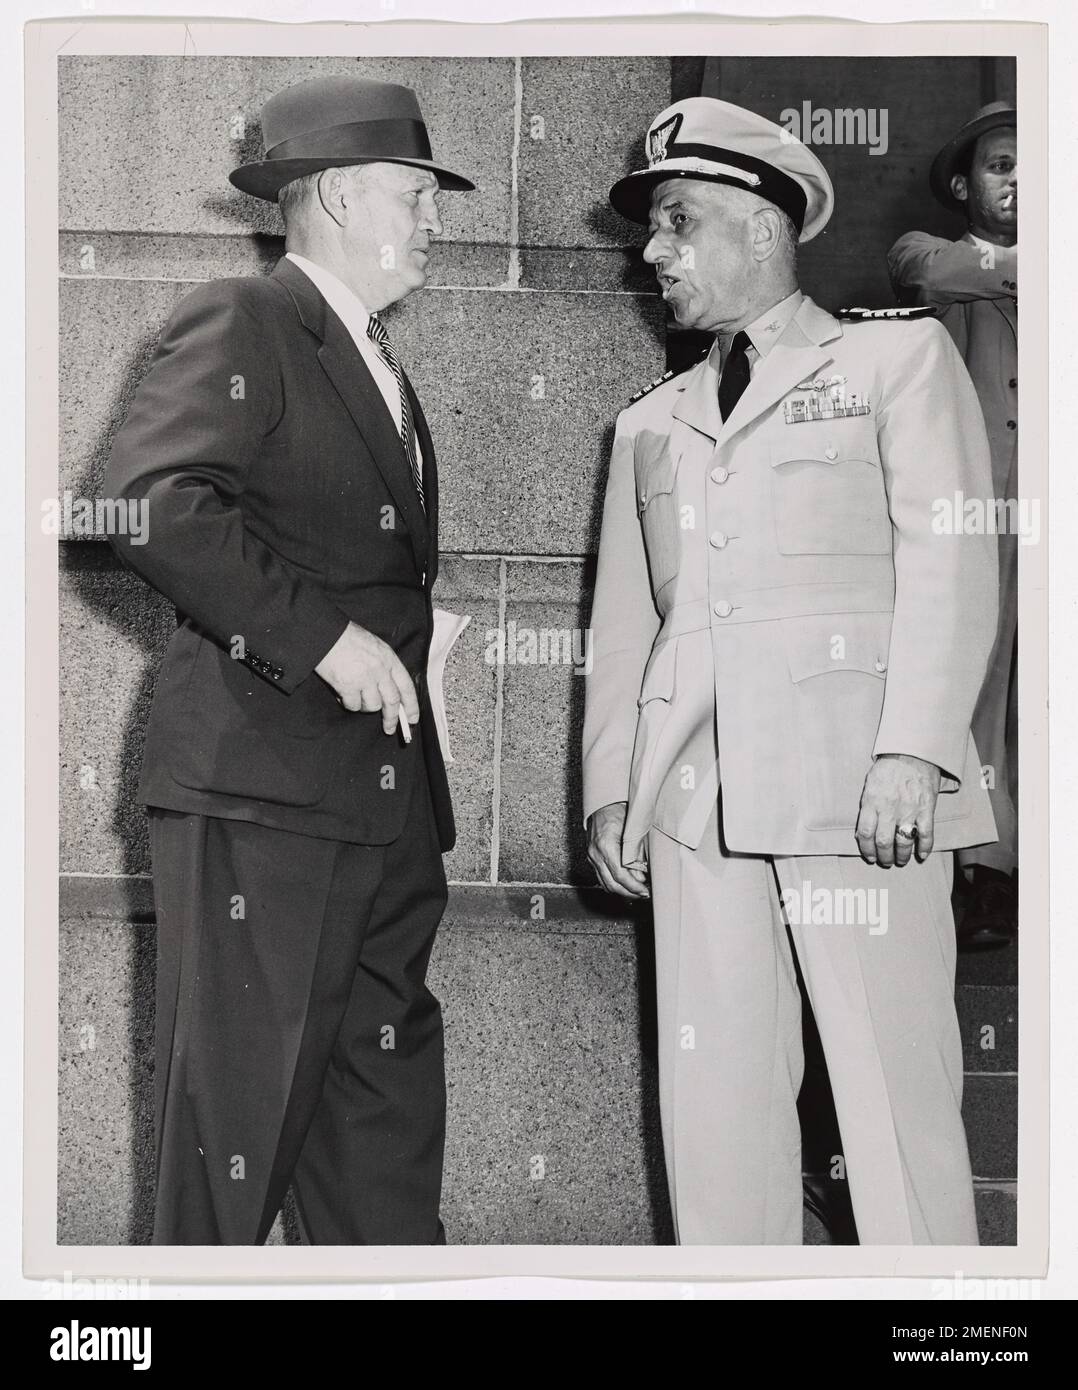 Captain Frank A. Leamy talks over UN Day activities with retired Navy Captain Thomas E. Lewis of the New Orleans Port Commission. Captain Frank A. Leamy, Commander, 8th Coast Guard District, New Orleans, talks over UN Day activities in front of New Orleans City Hall, with retired Navy Captain Thomas E. Lewis of the New Orleans Port Commission. Stock Photo